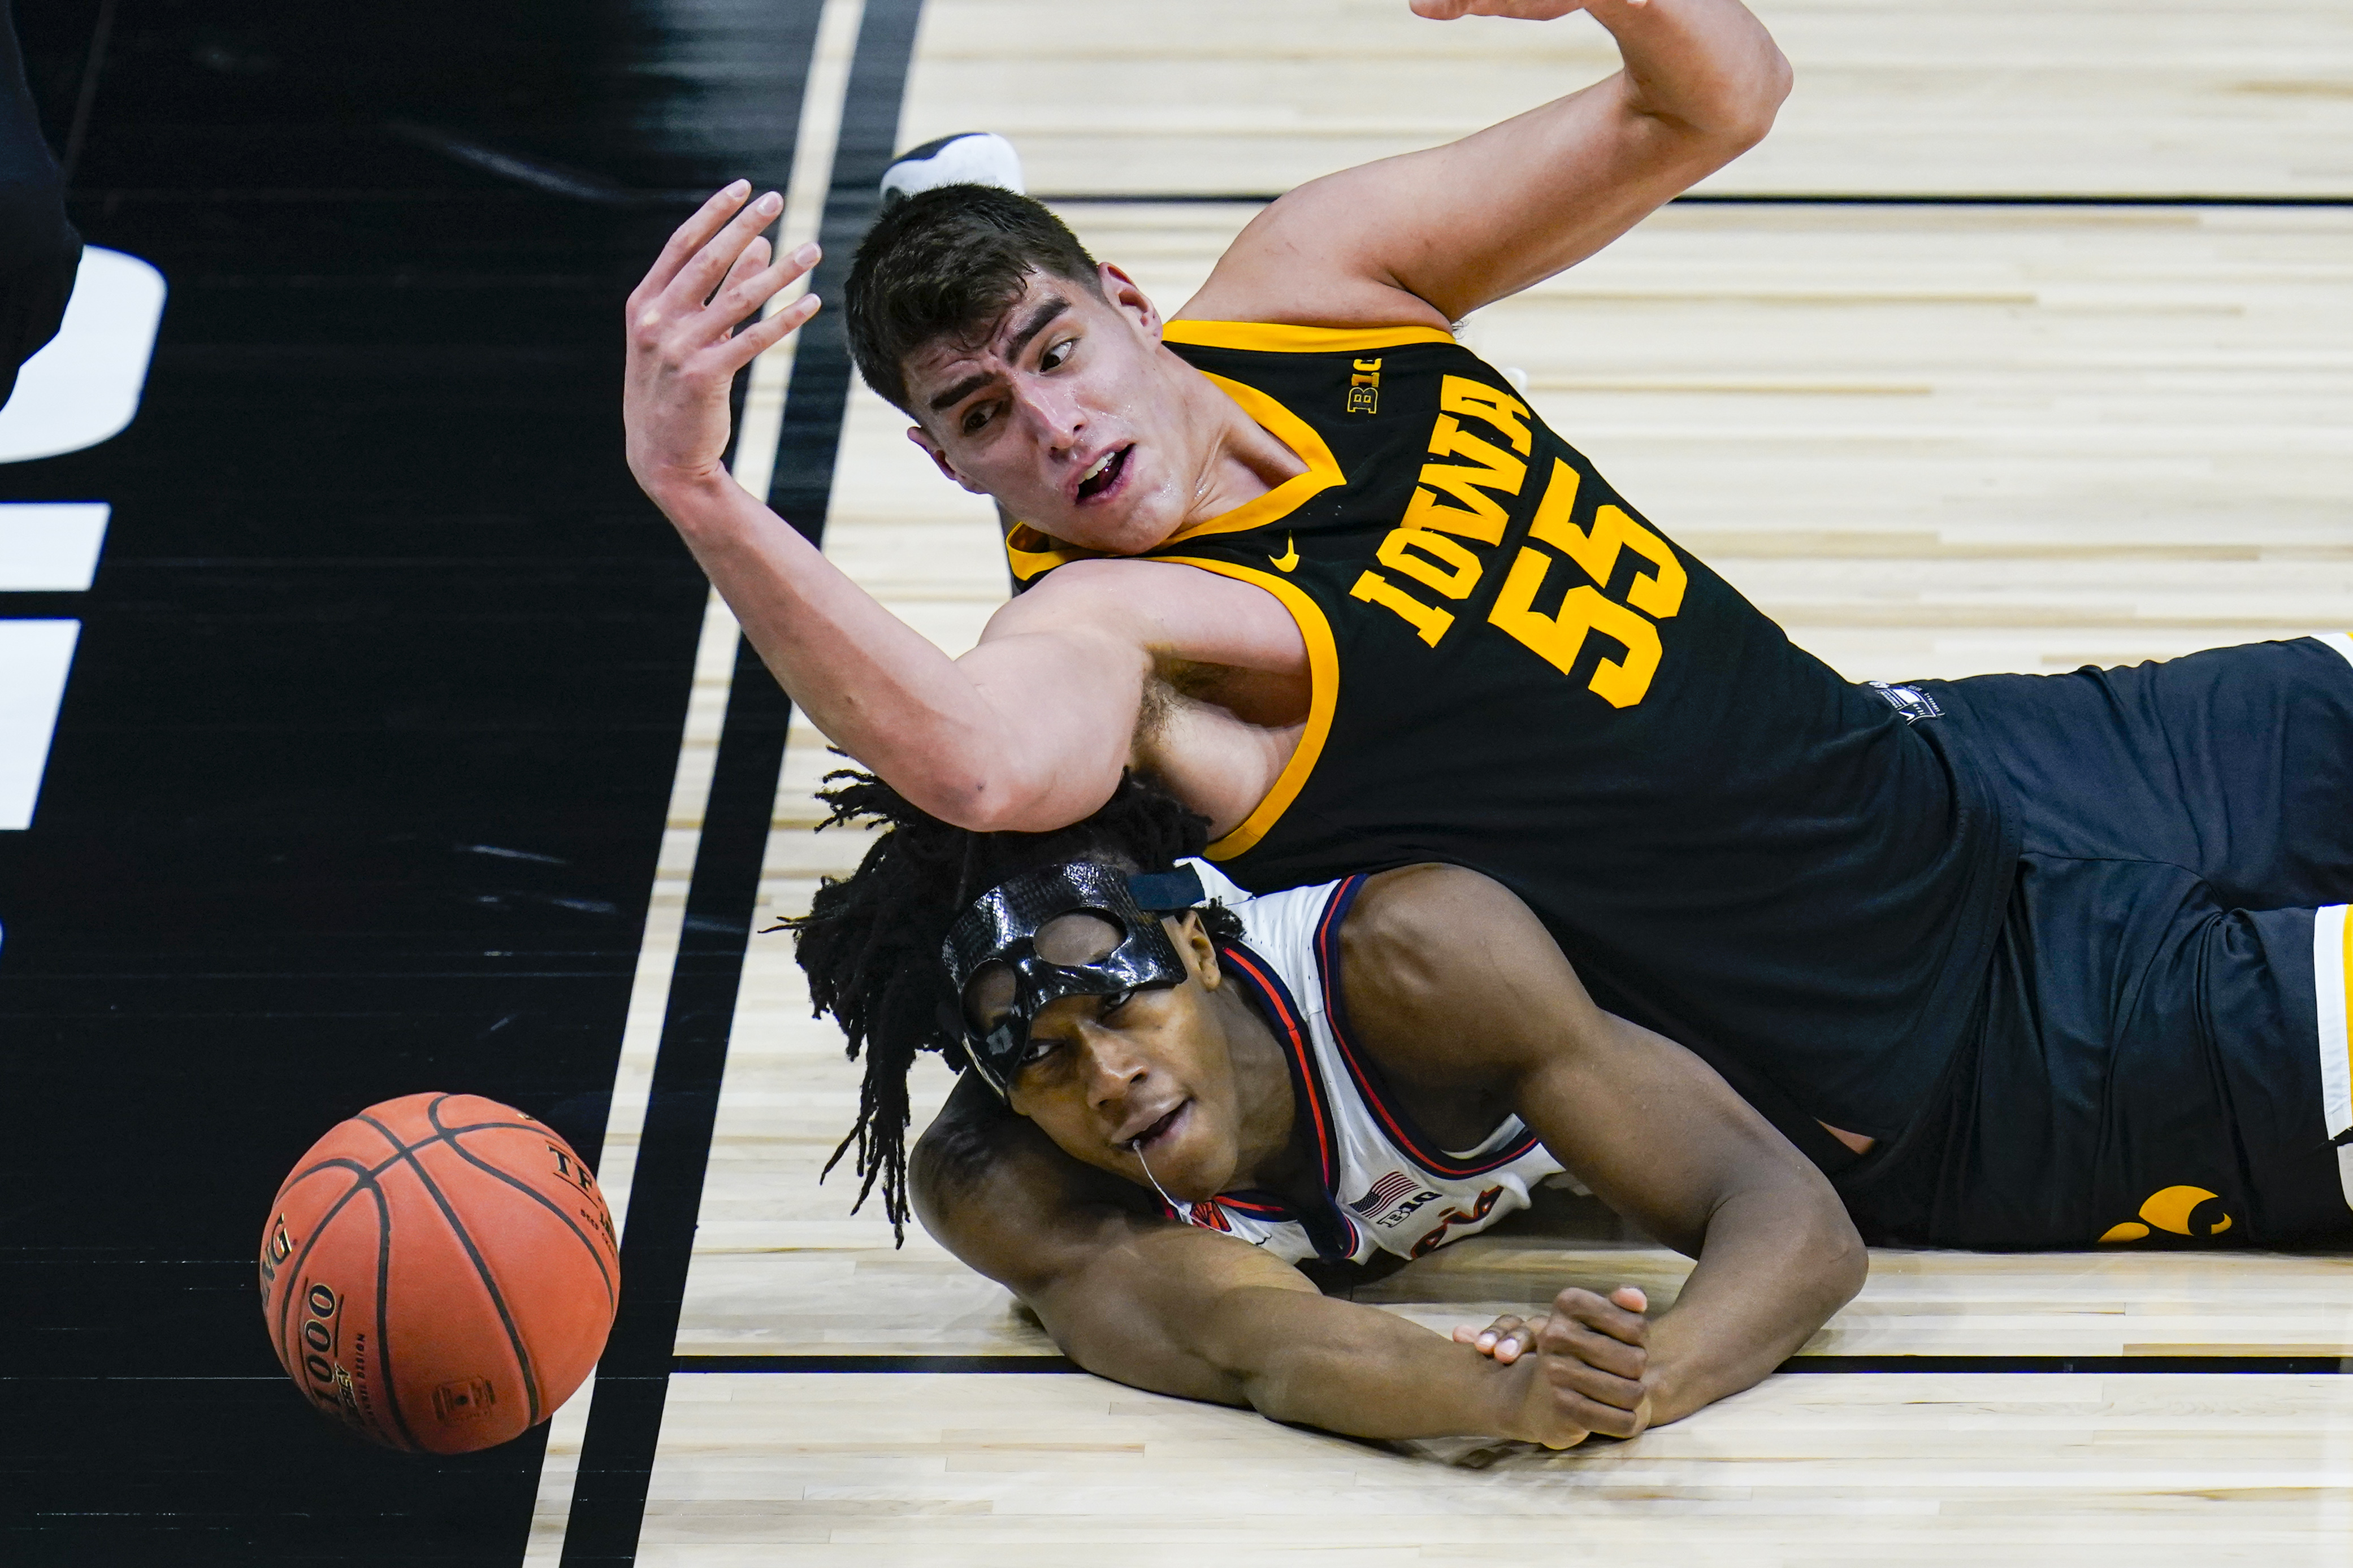 INDIANAPOLIS, IN - MARCH 13: Iowa Hawkeyes guard Jordan Bohannon (3) and  Illinois Fighting Illini guard Andre Curbelo (5) dive for a loose ball  during the men's Big Ten tournament college basketball